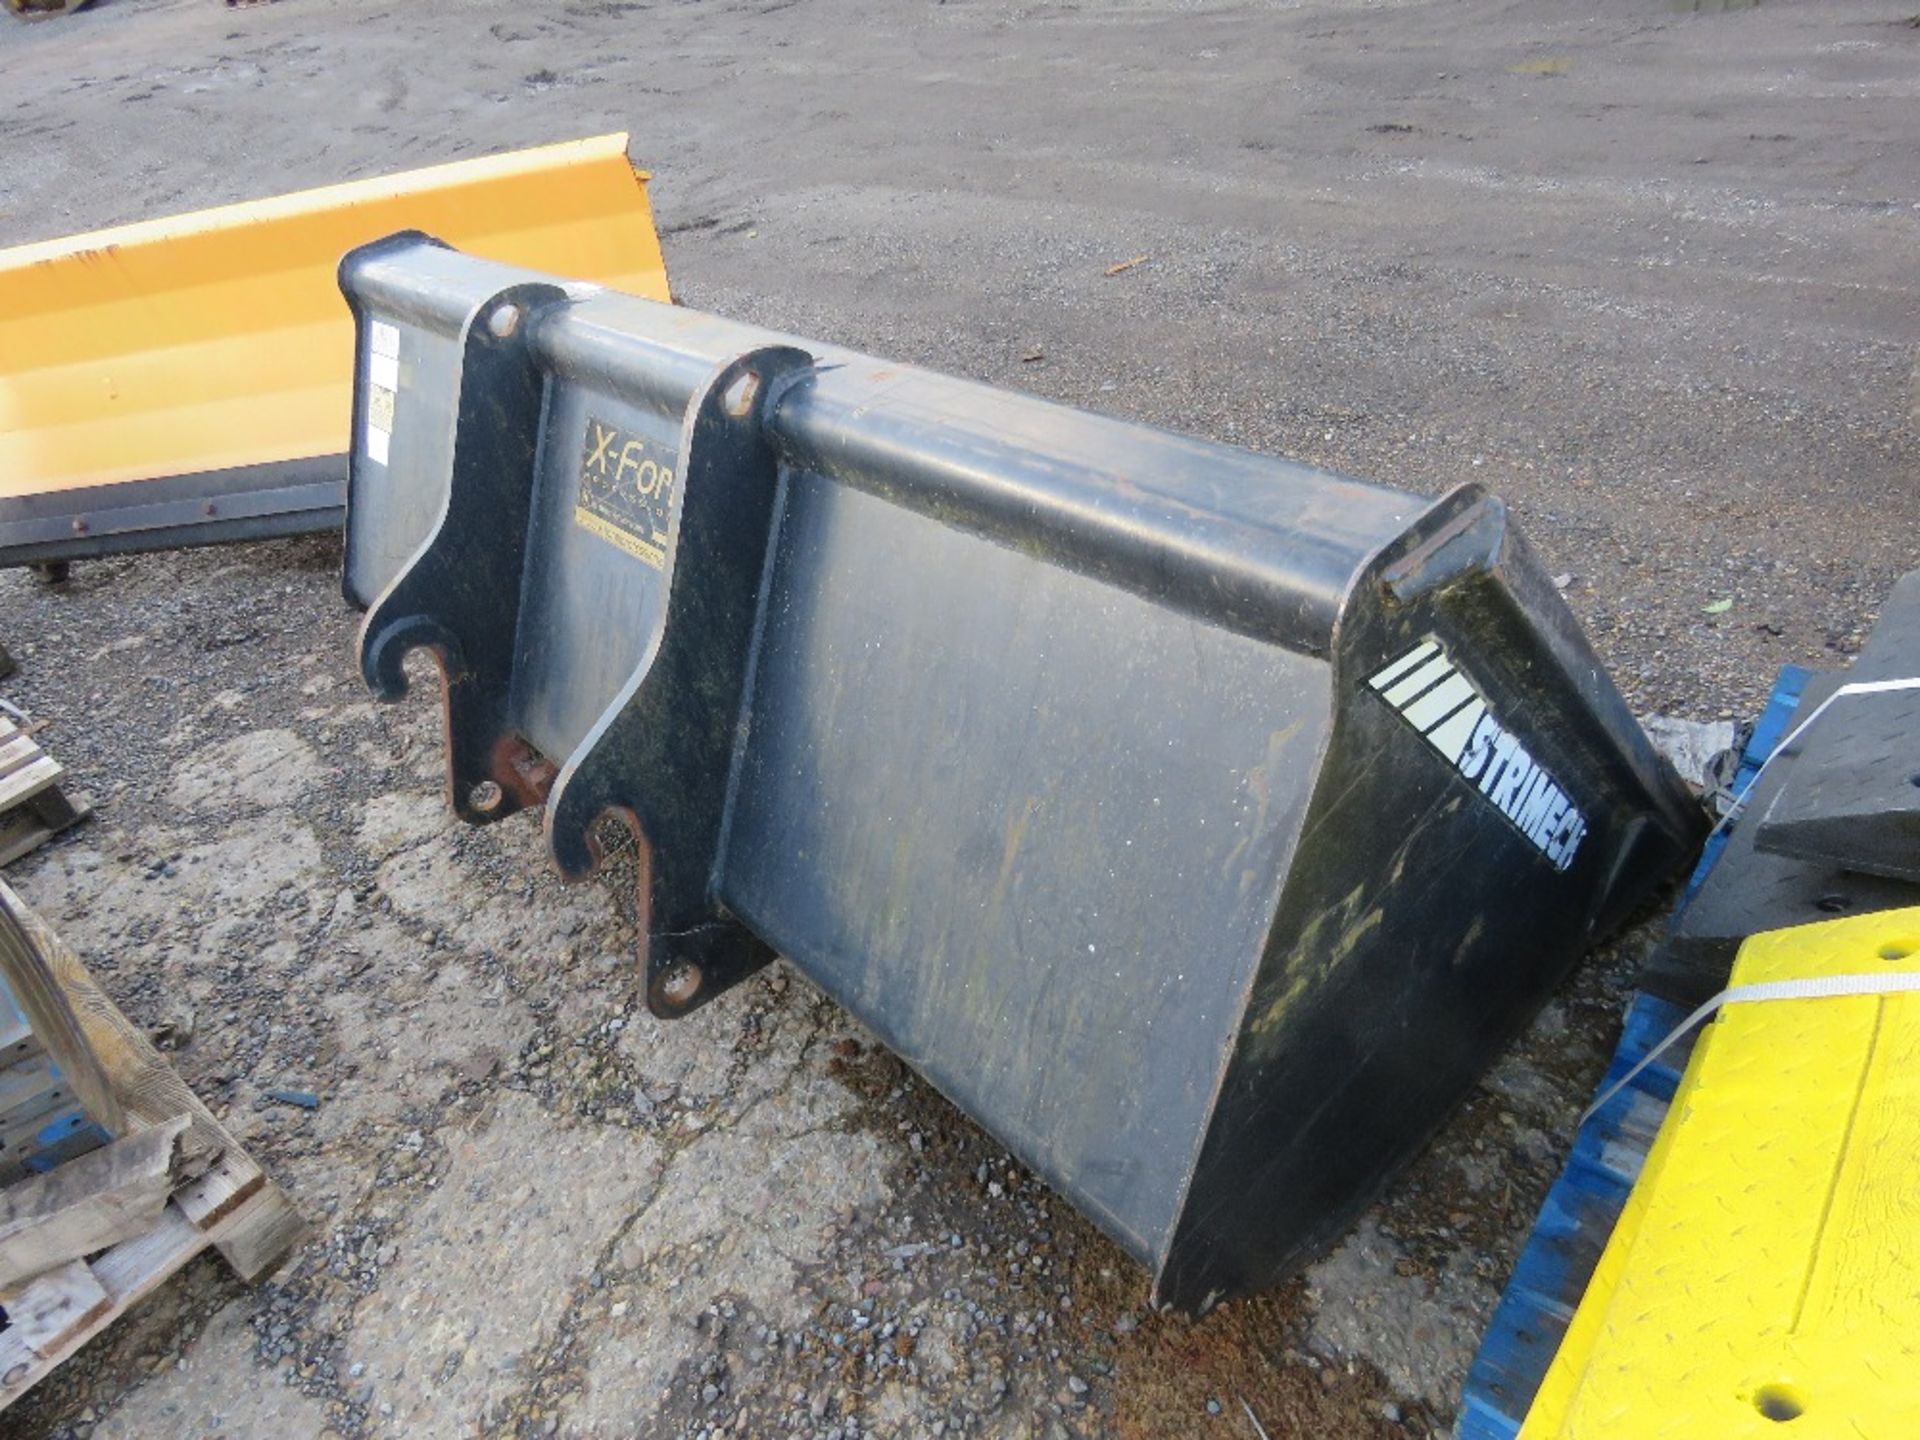 STRIMECH JCB LOADING BUCKET. SUITABLE FOR TELETRUK TYPE MACHINE OR SIMILAR. 6FT WIDTH APPROX. TH - Image 3 of 4